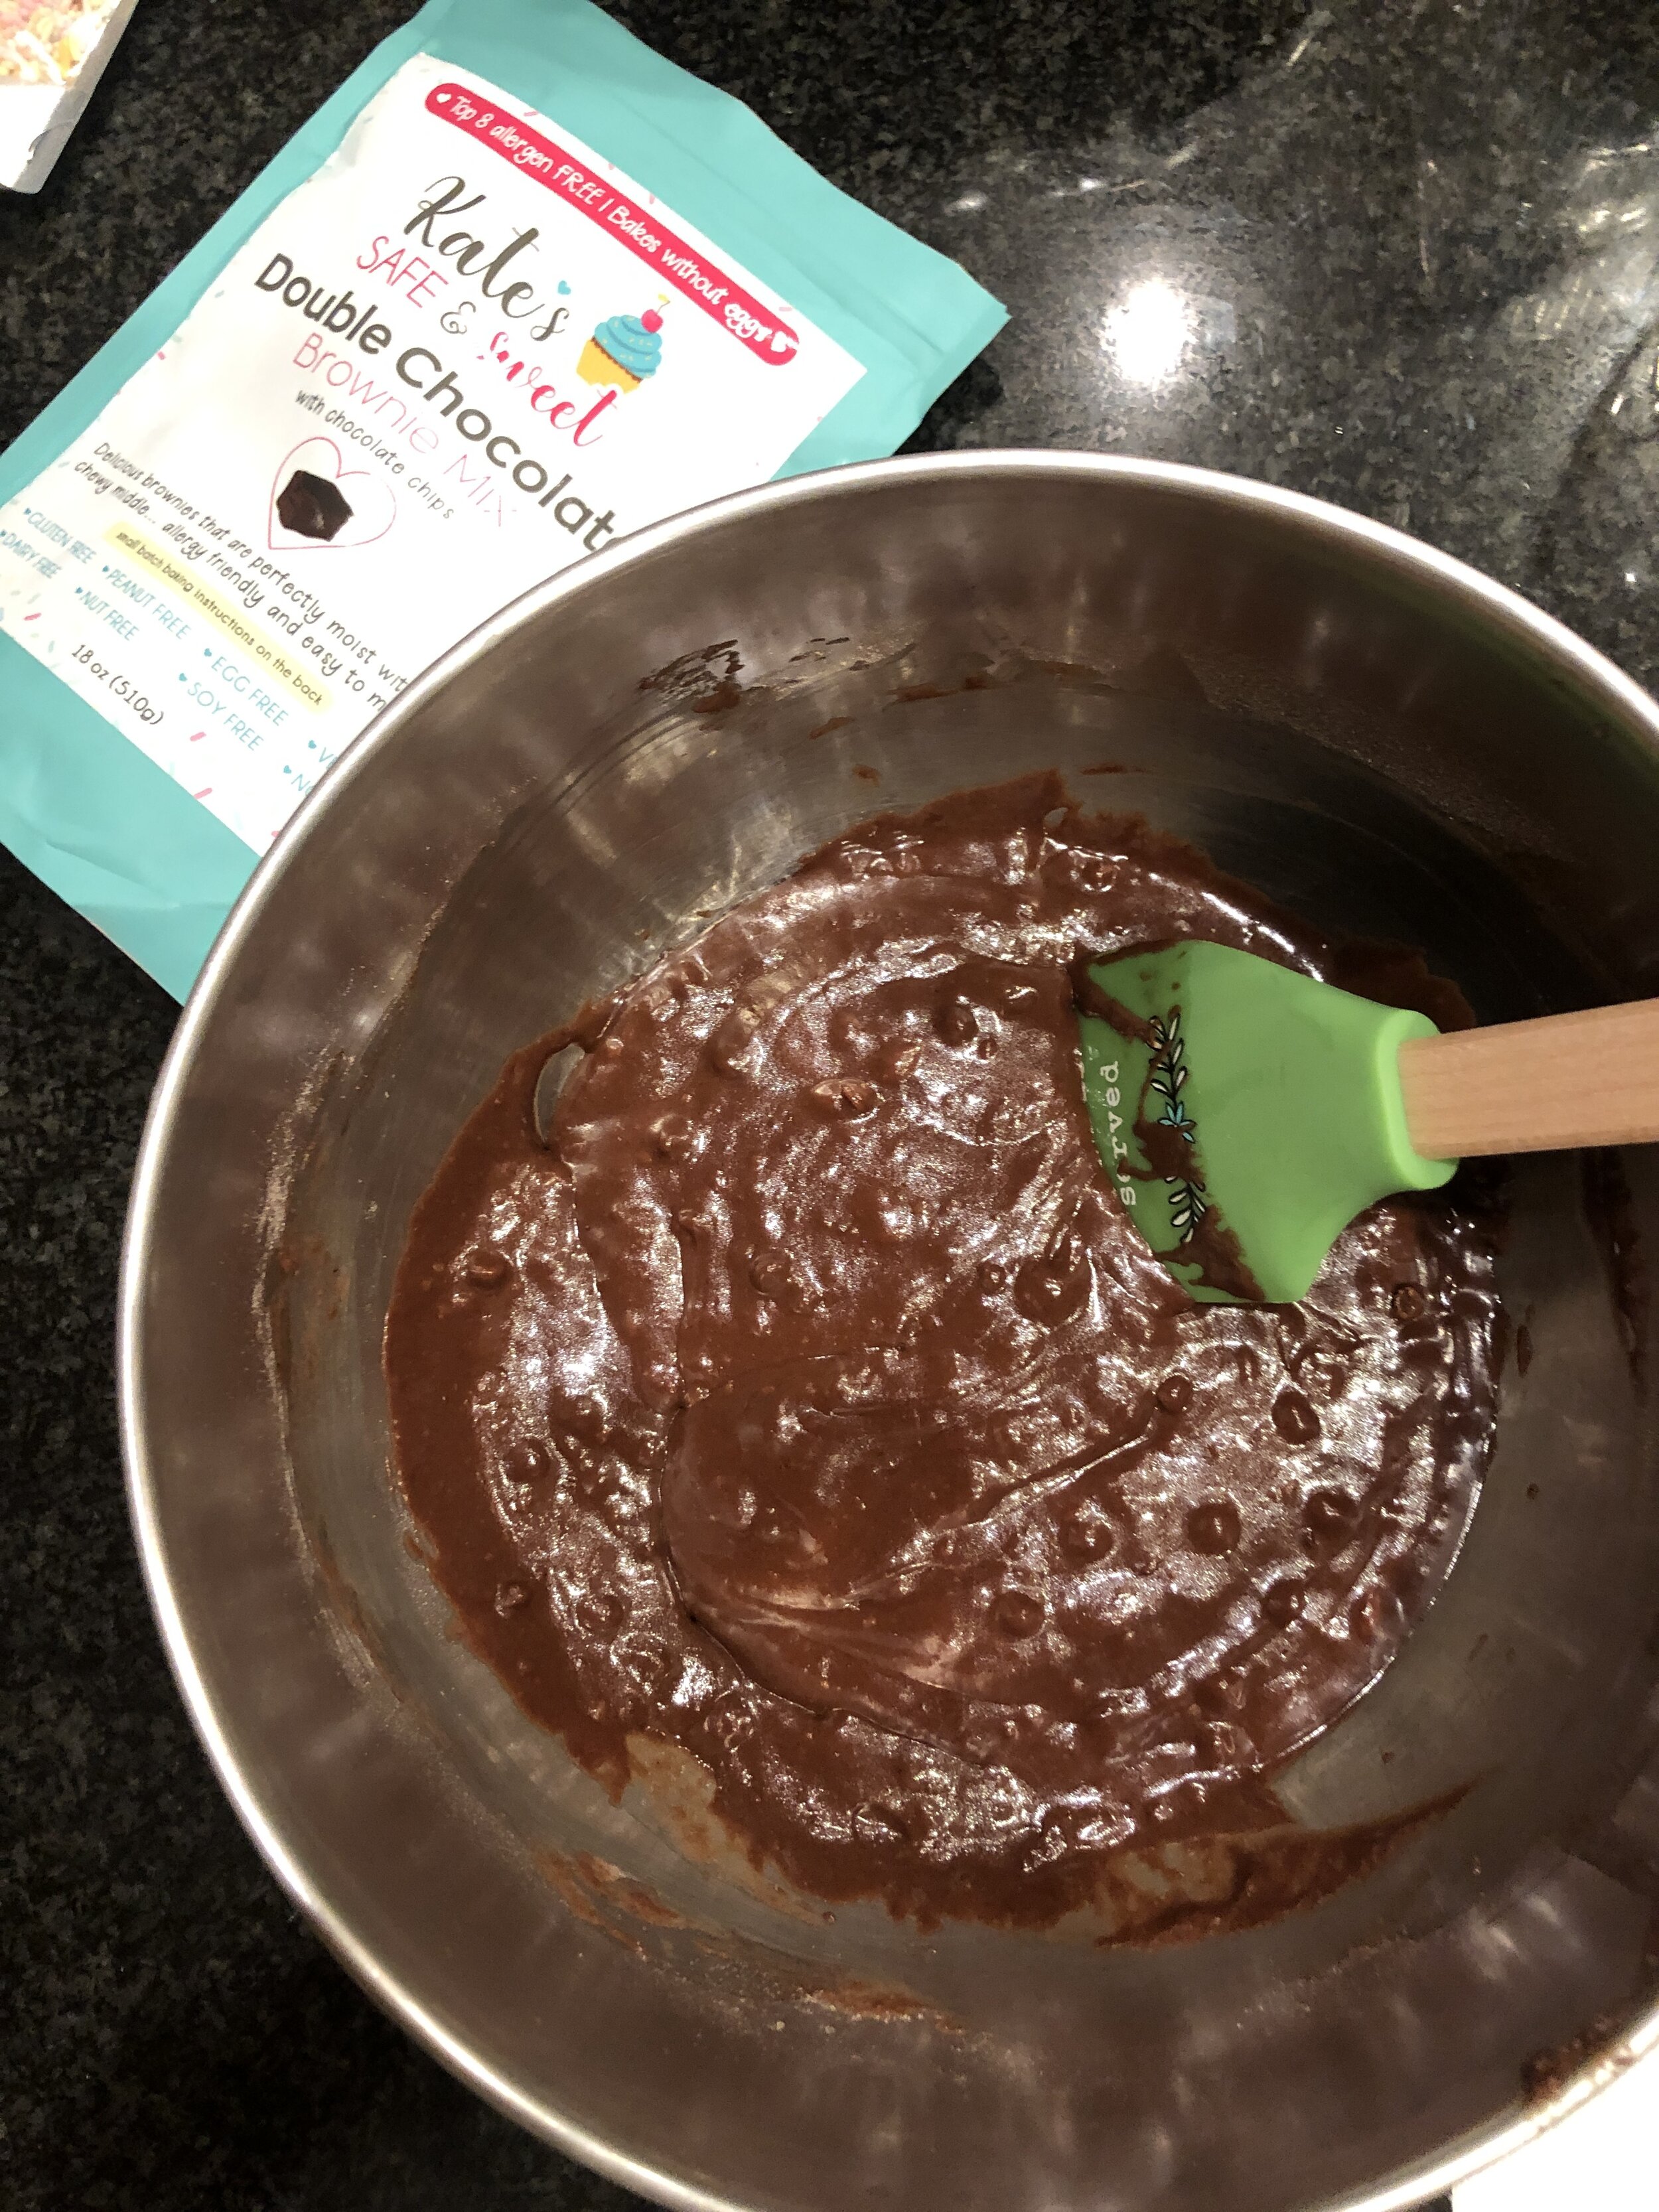 Kate's safe and sweet gluten free brownie mix